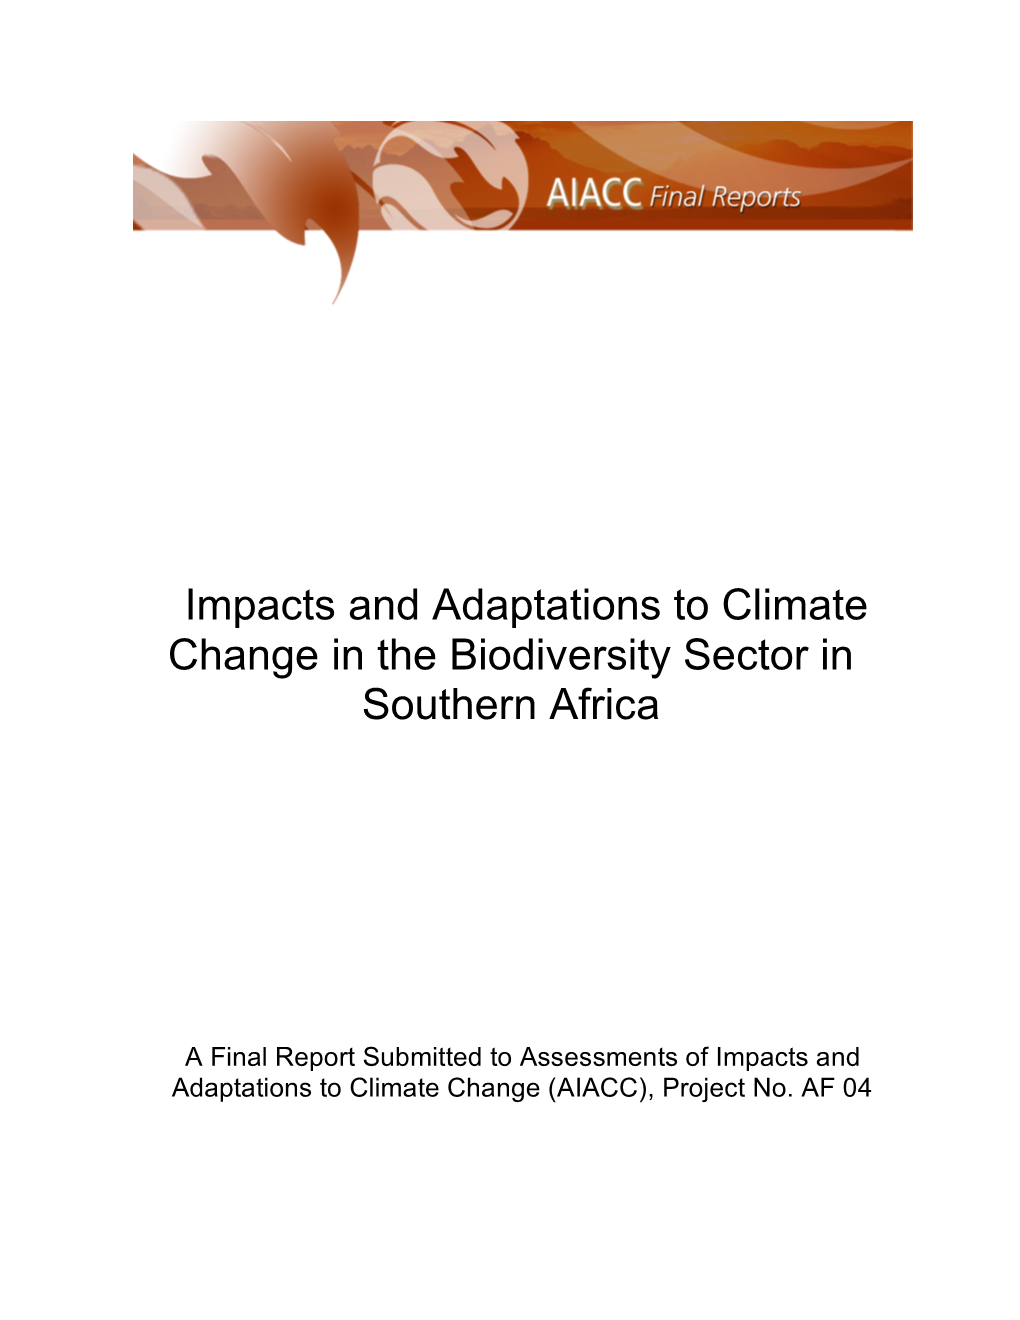 Impacts and Adaptations to Climate Change in the Biodiversity Sector in Southern Africa